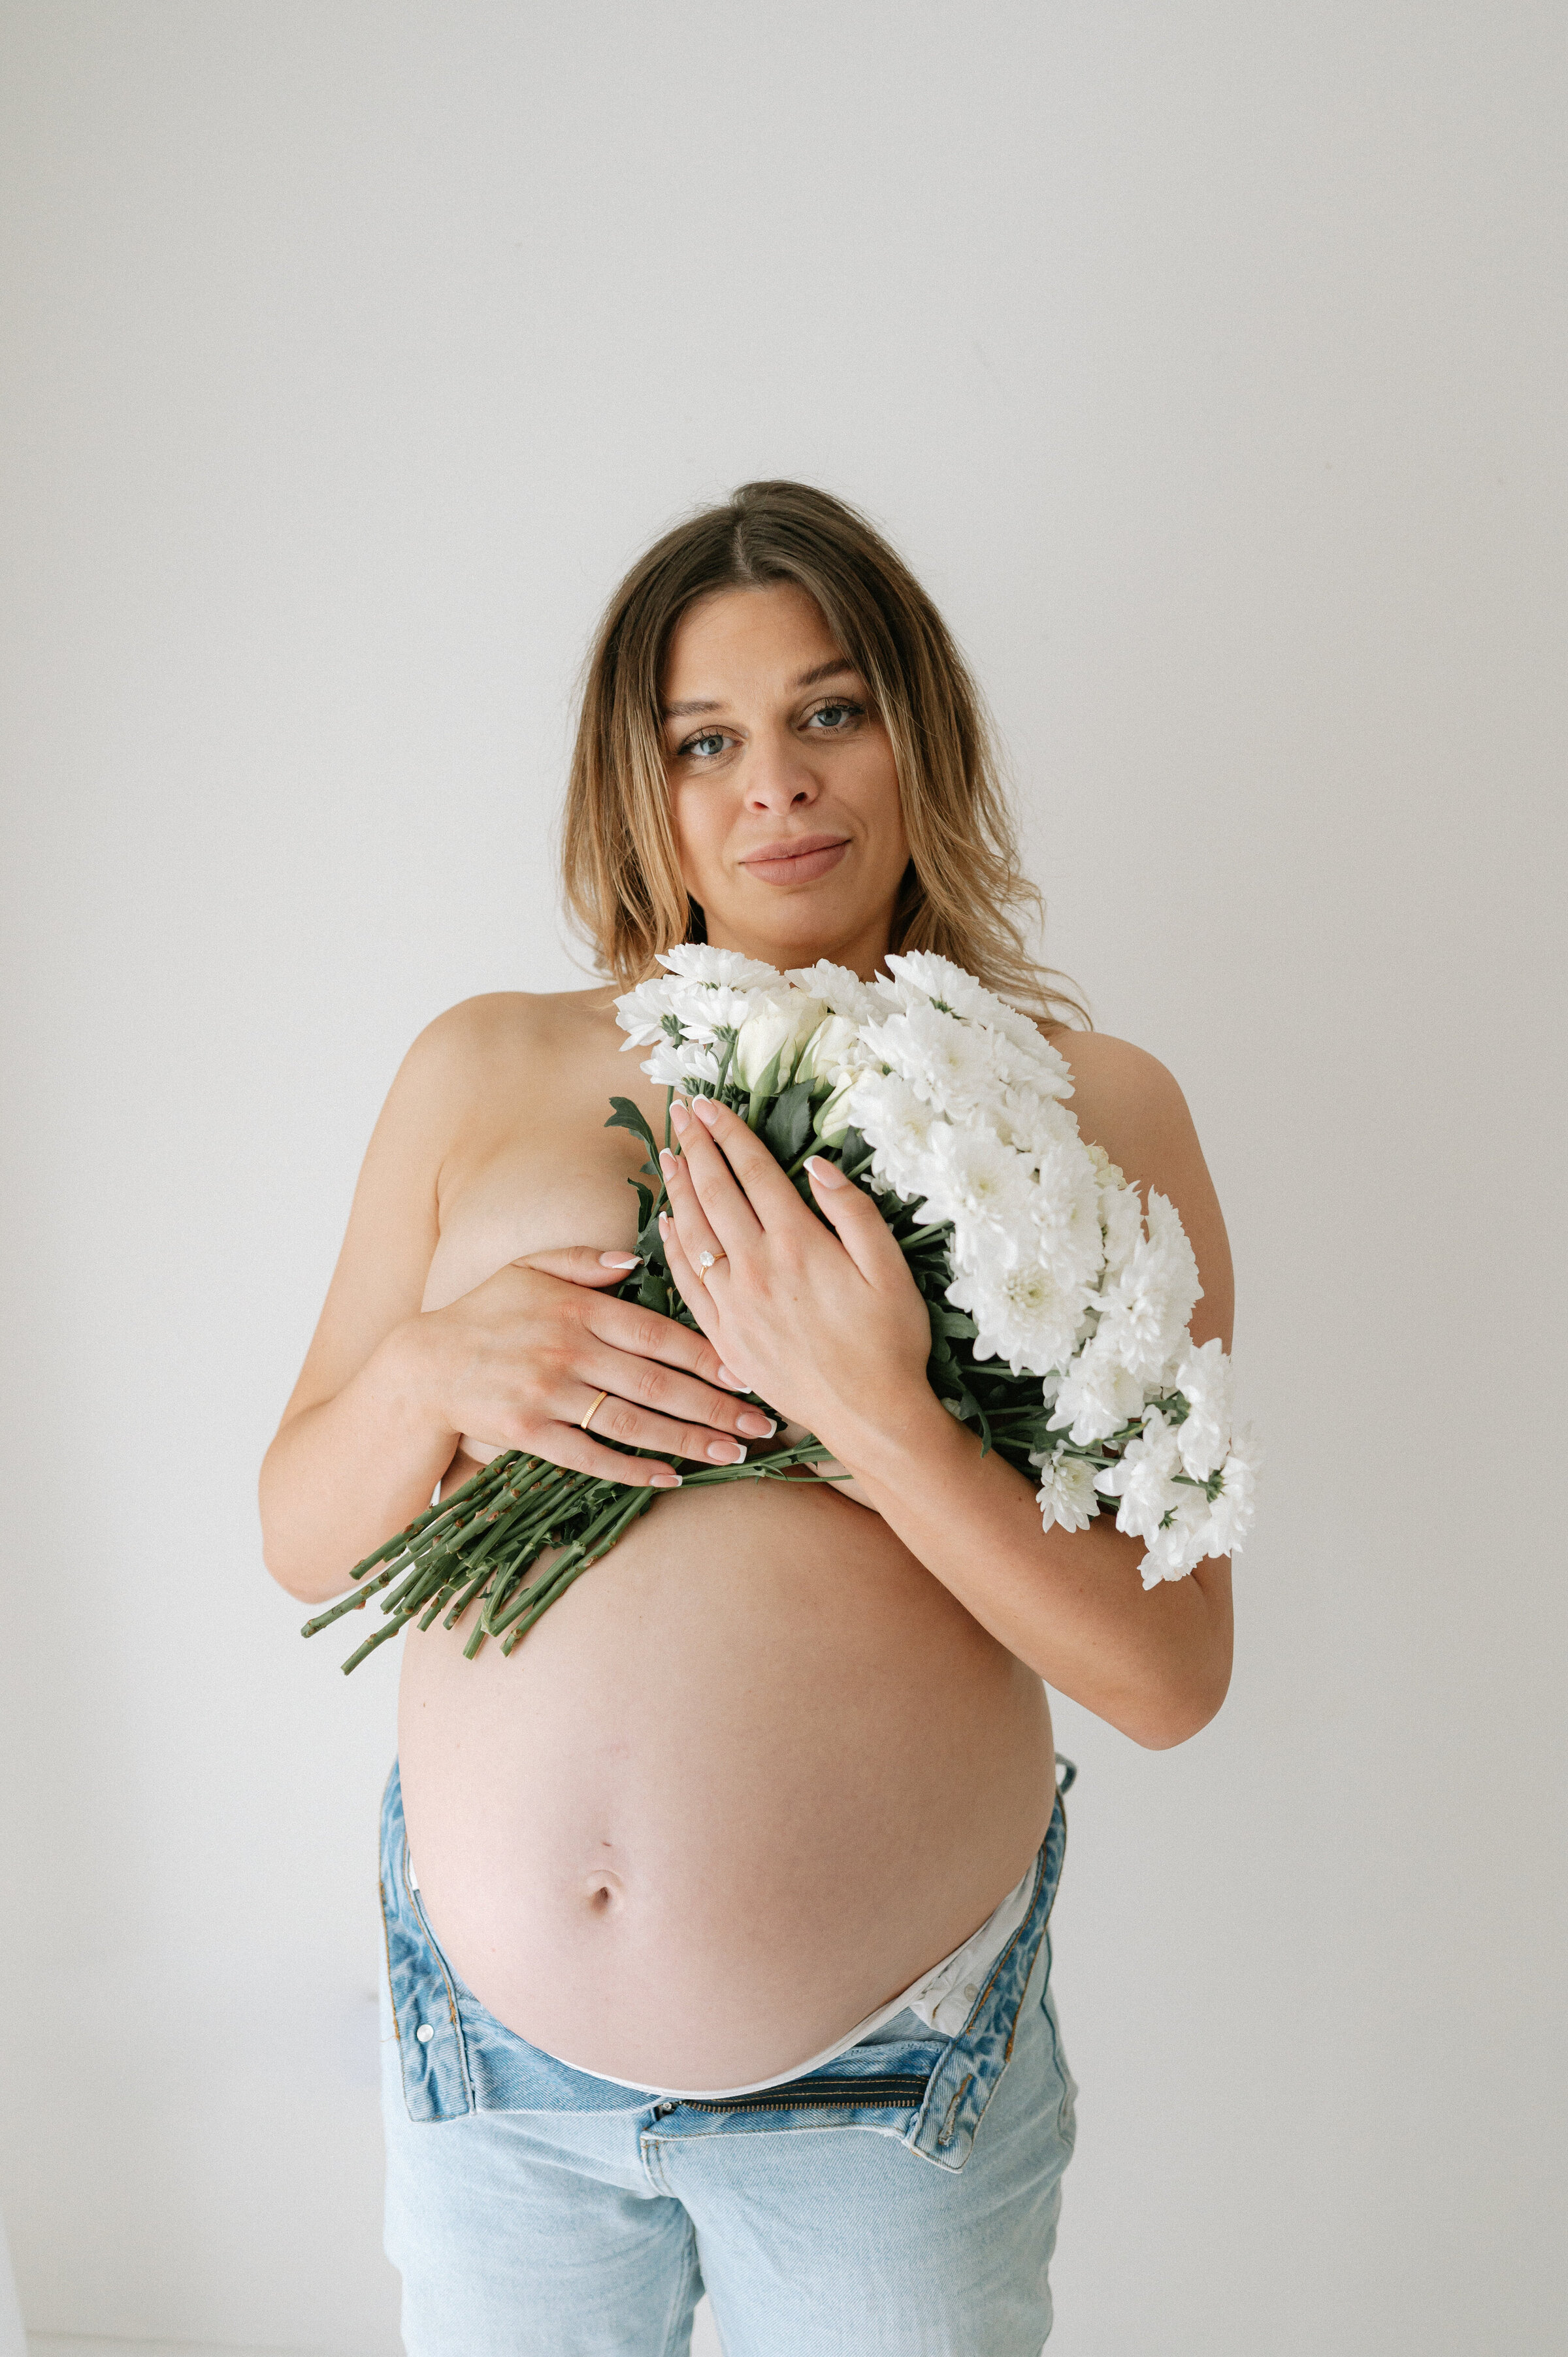 york Mum who is pregnant holding beautiful flowers